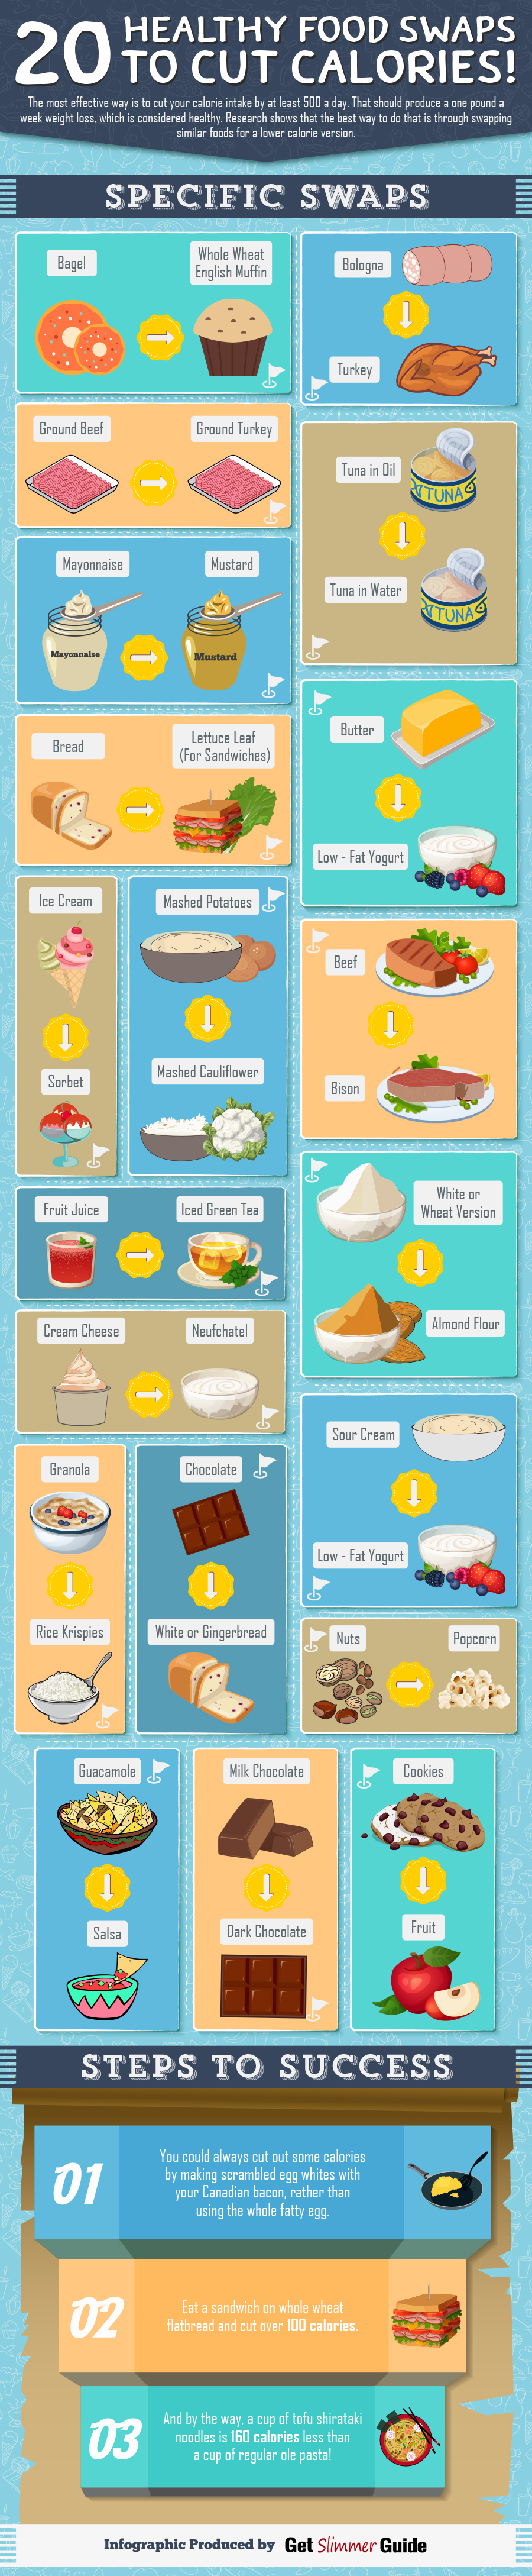 20 Healthy Food Swaps to Cut Calories